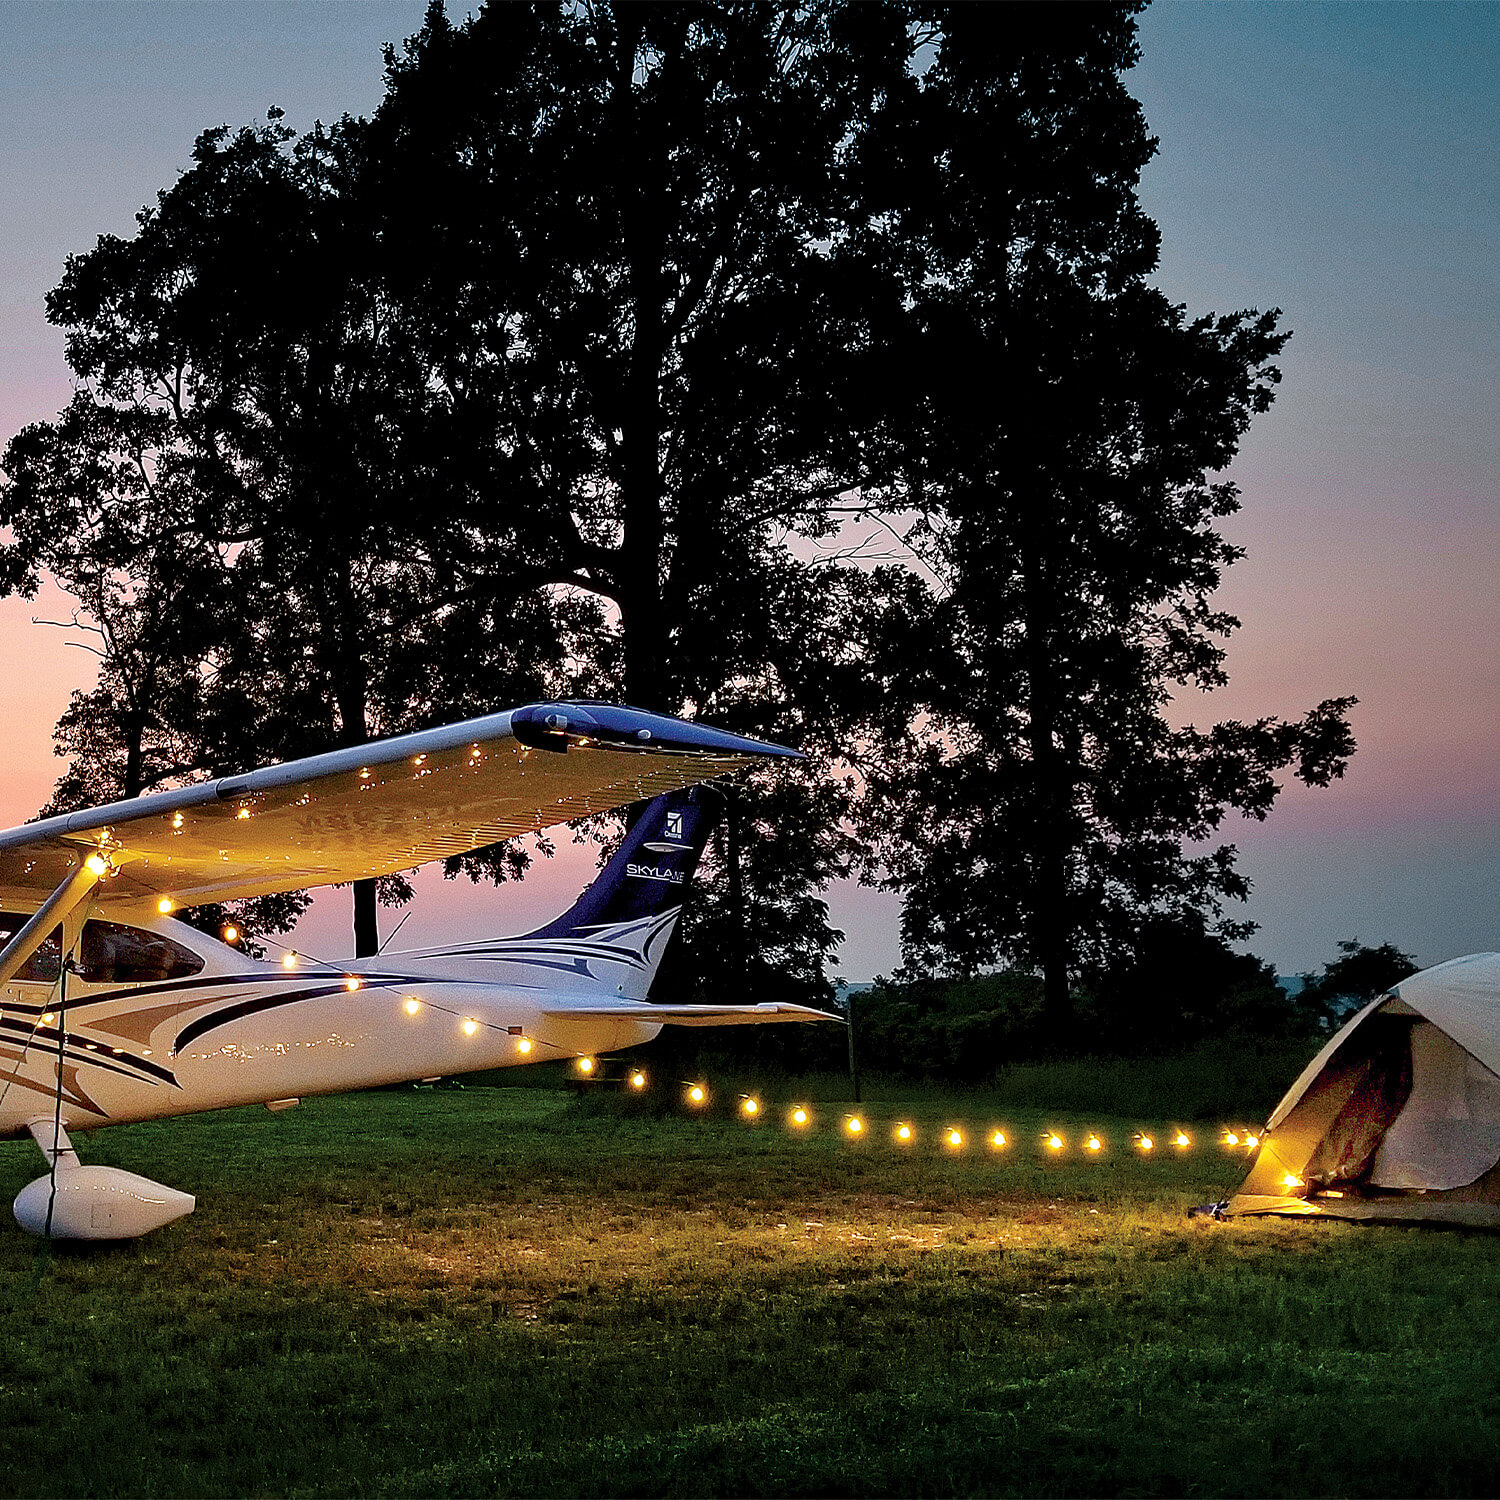 Cessna Skylane at a camp site next to a tent with lights.